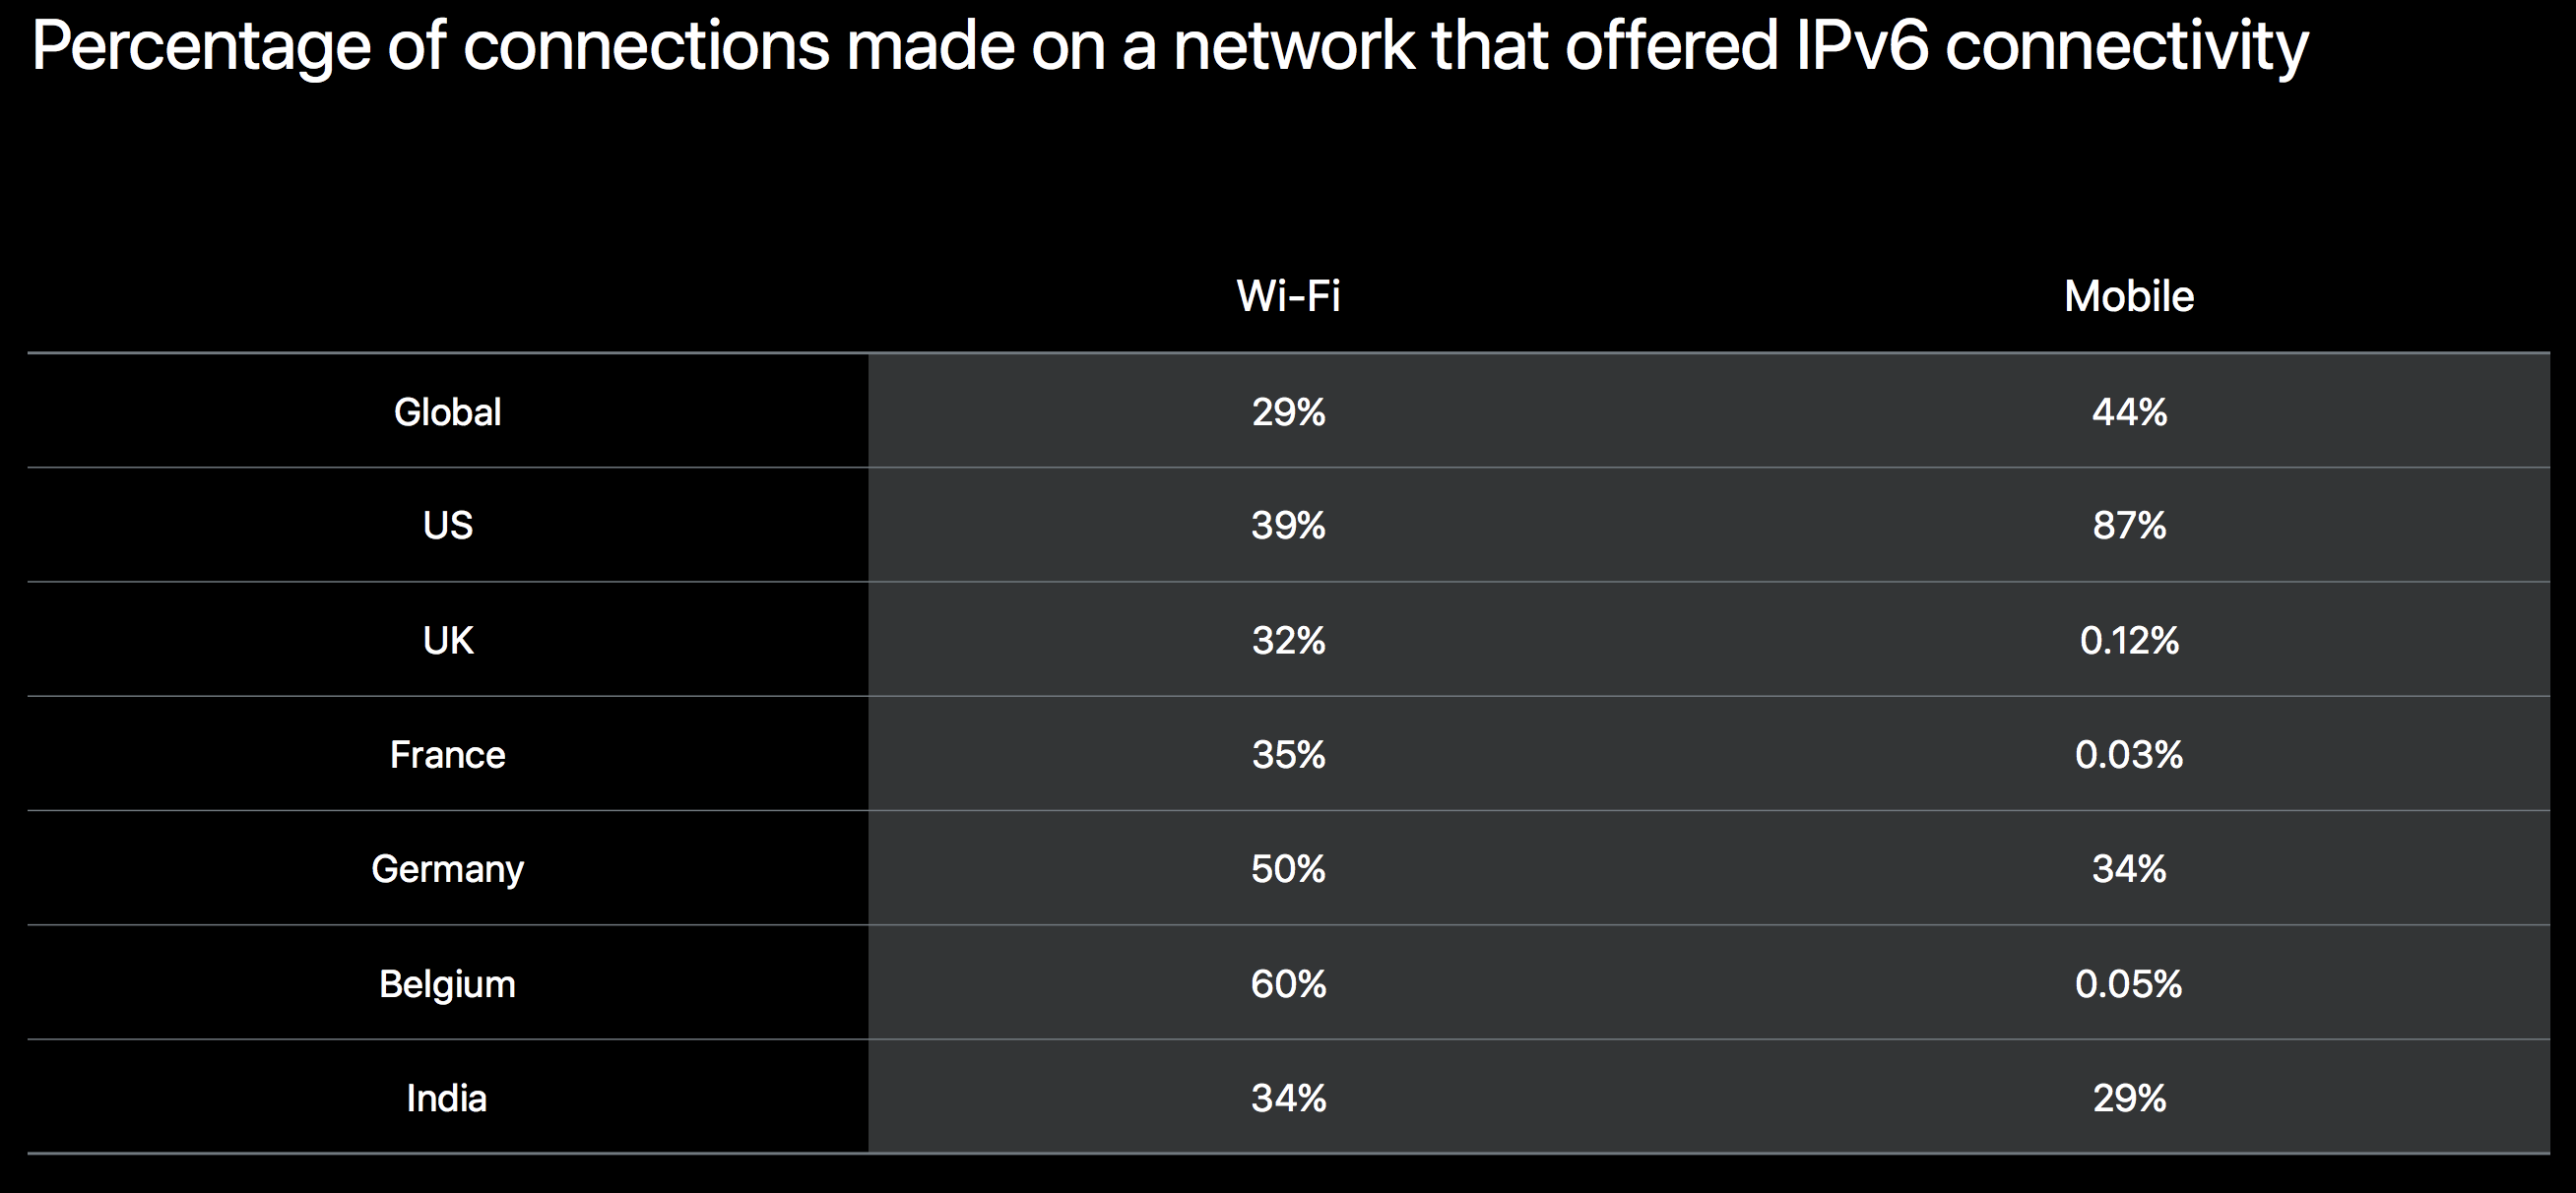 Percentage of connections made on a network that offered IPv6 connectivity